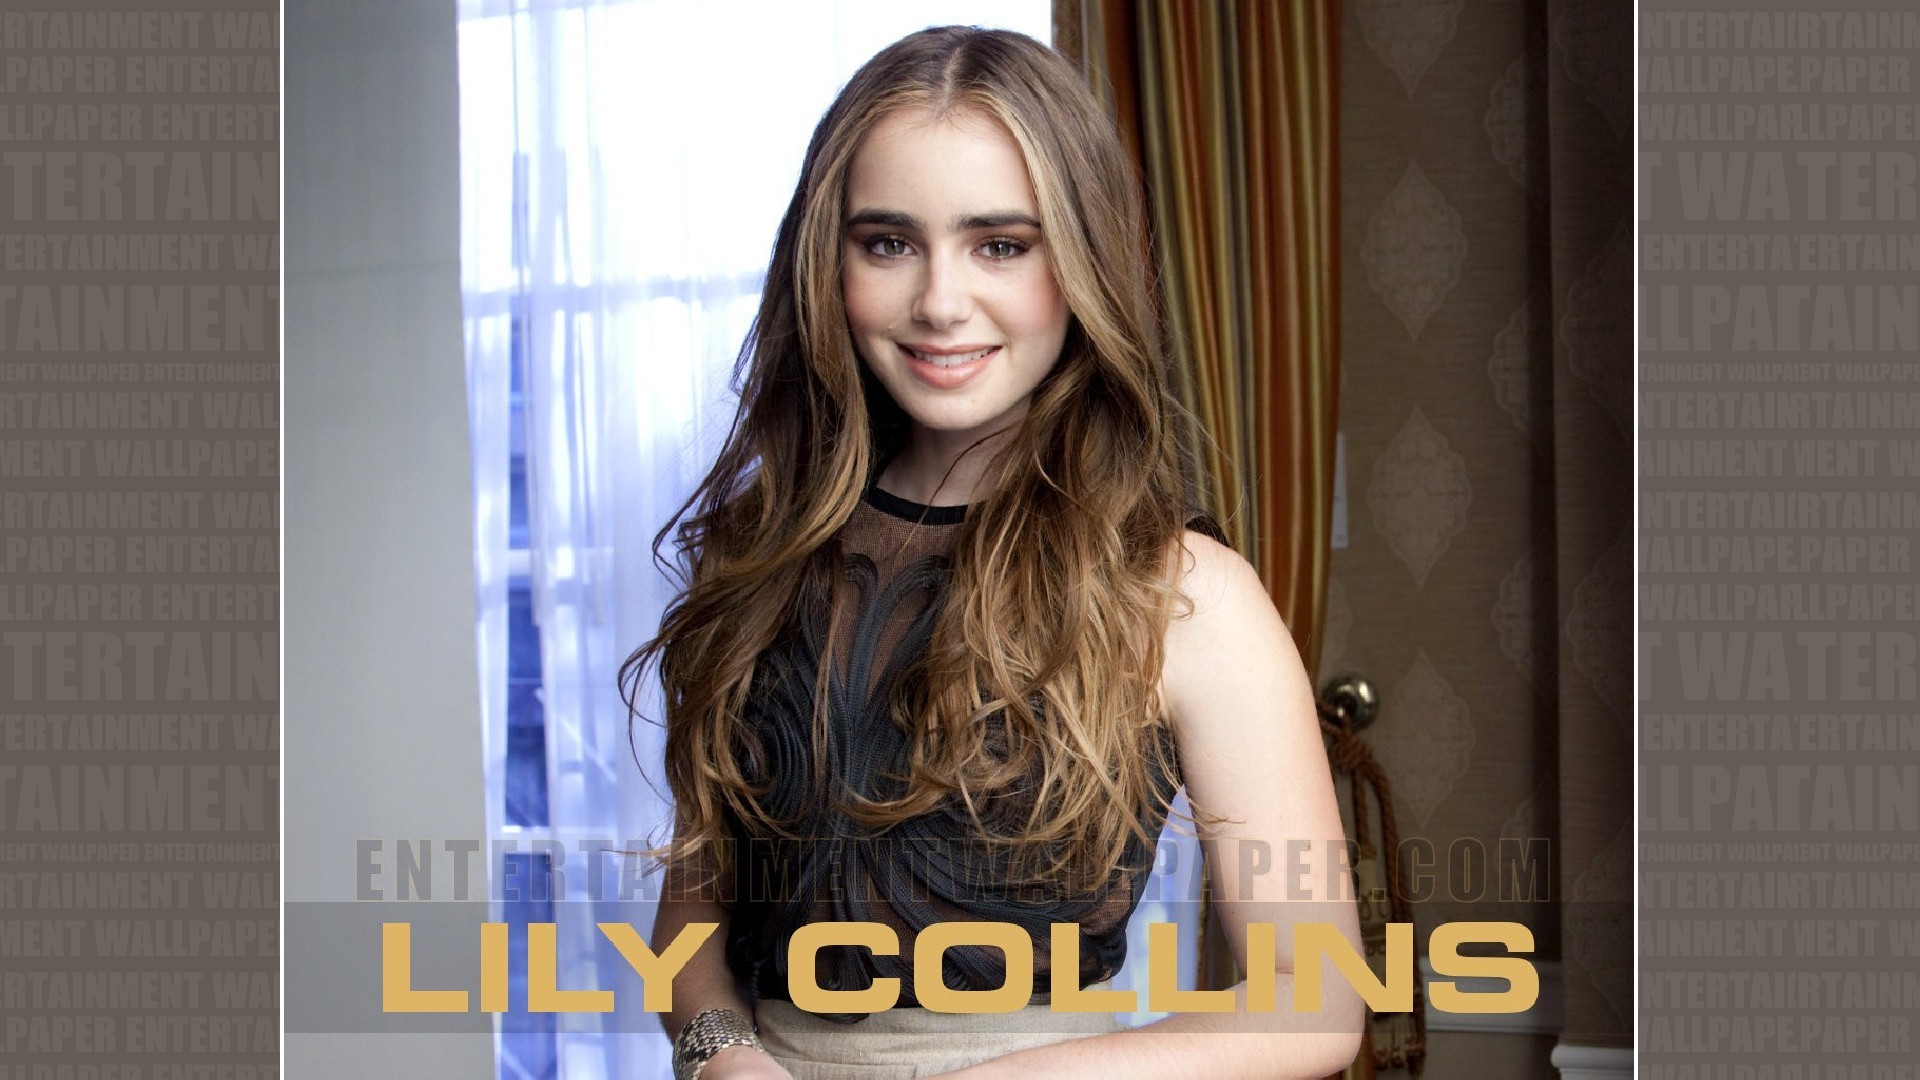 1920x1080 Lily Collins Wallpaper - Original size, download now.